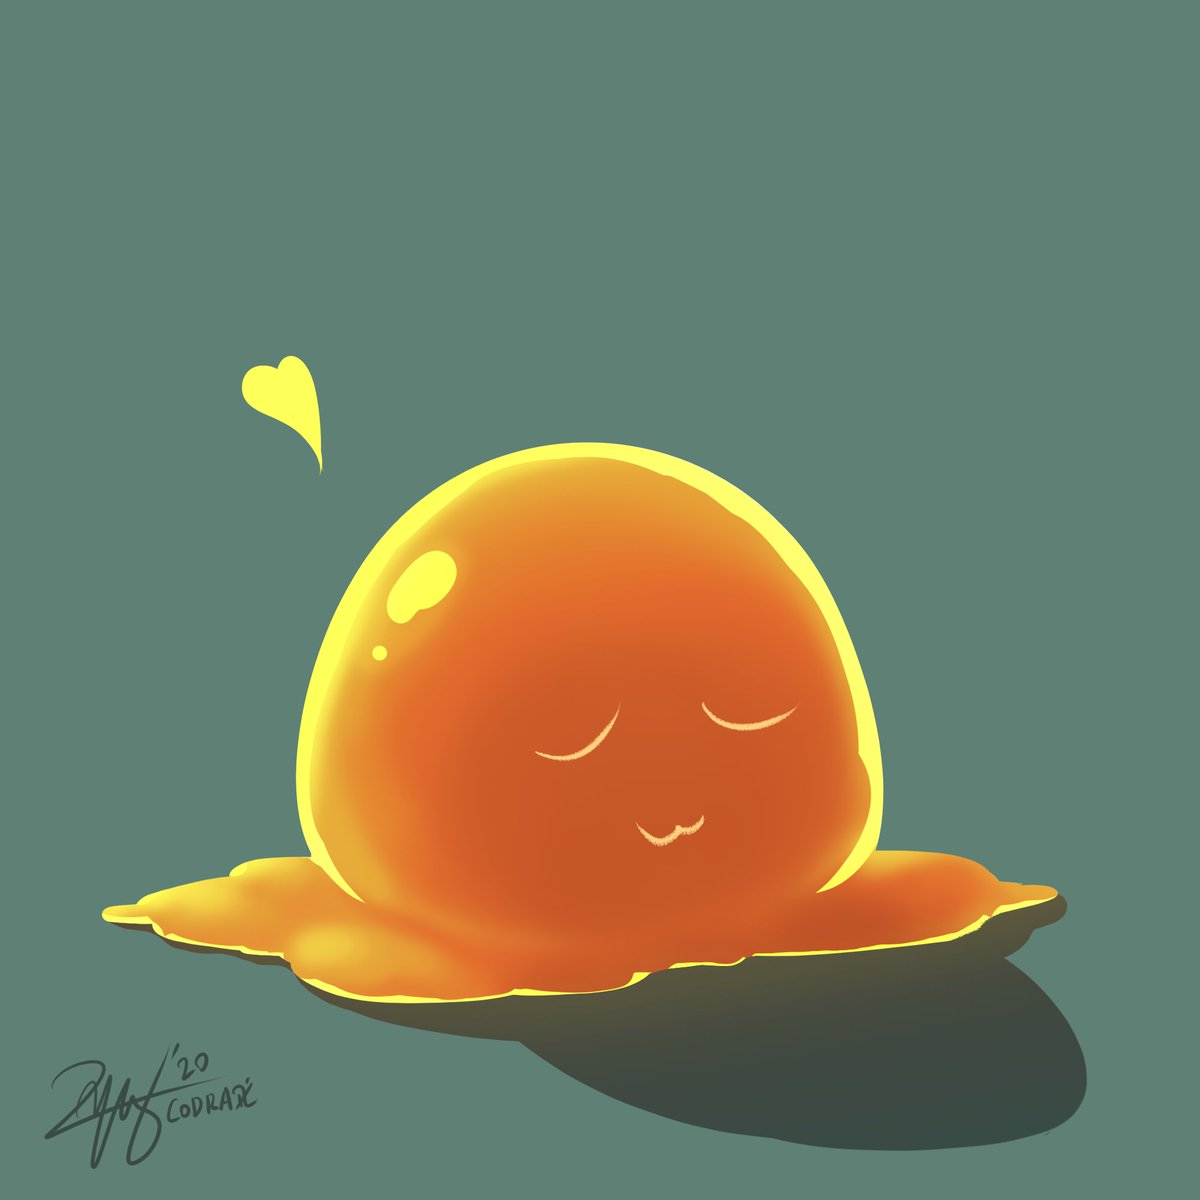 Scp-999 being adorable some artist - Illustrations ART street